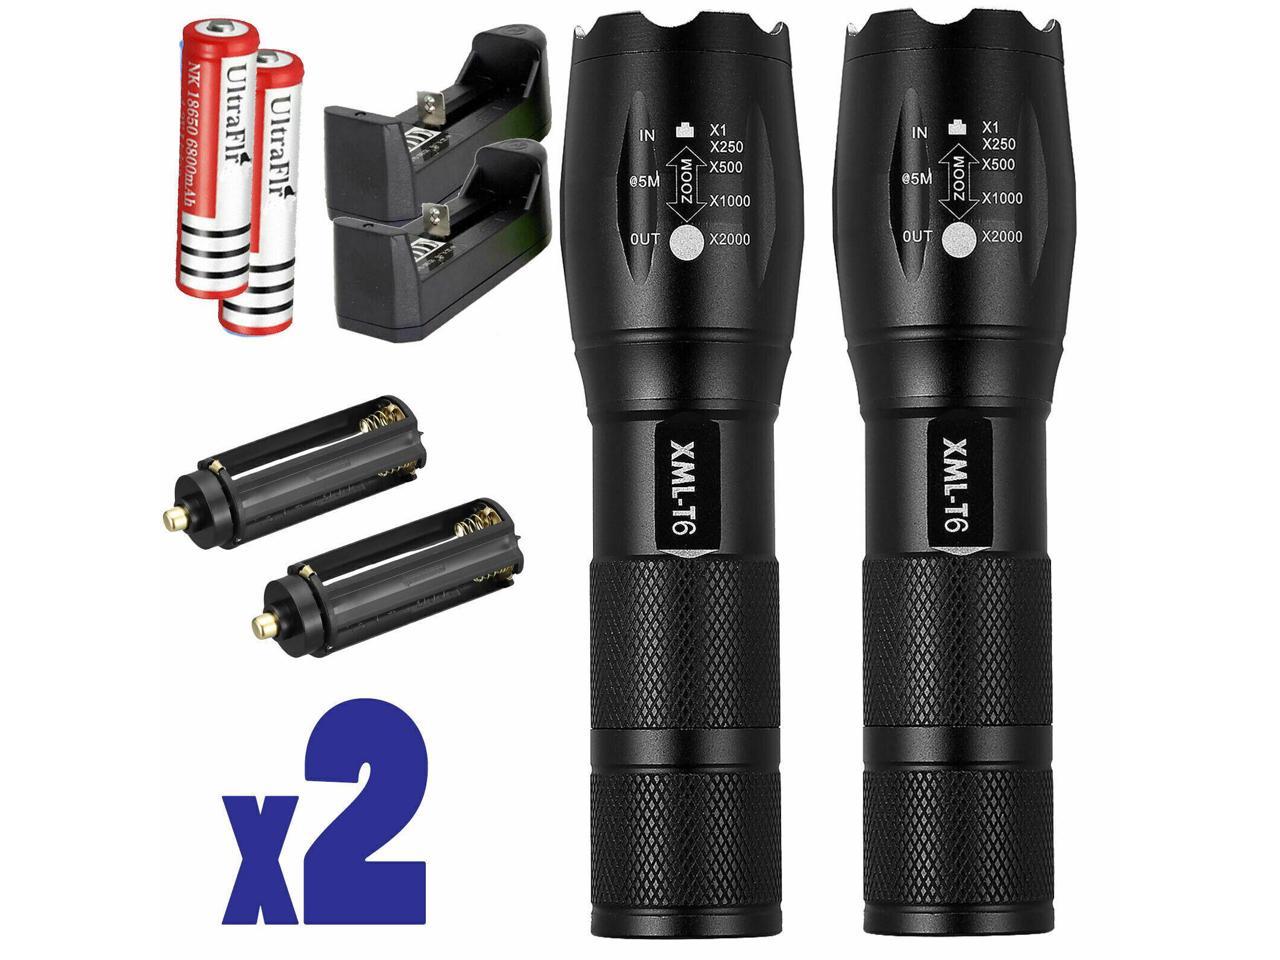 Ultrafire Tactical 150000LM T6 Power LED Zoom Police Flashlight+18650&Charger US 